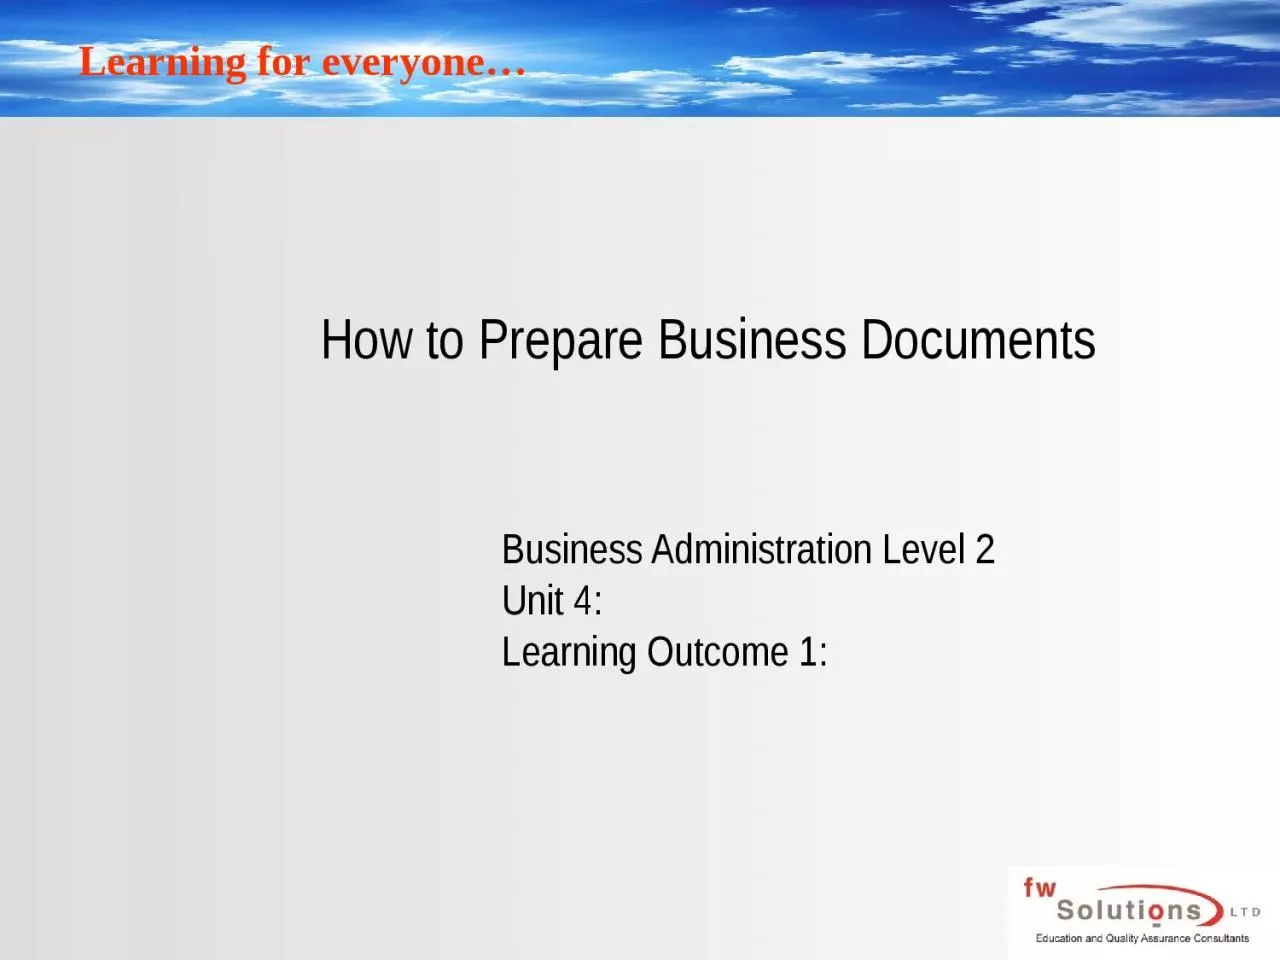 How to Prepare Business Documents